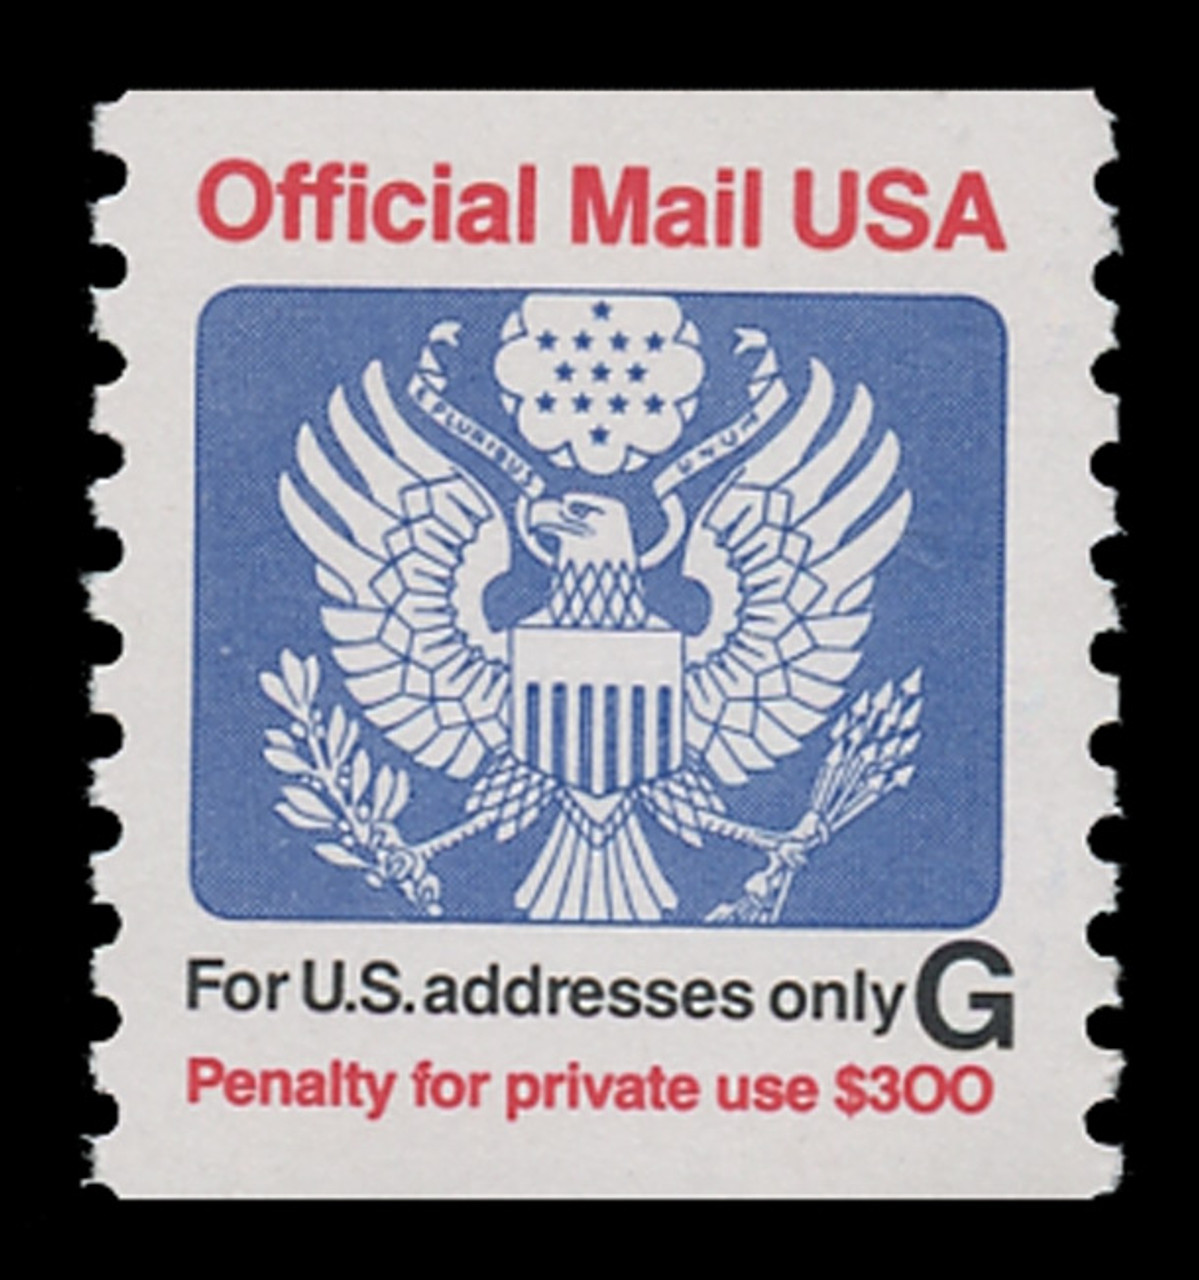 USA Scott # O 152, 1994 (32c) "For USA Addresses Only G" Official Mail Eagle Coil